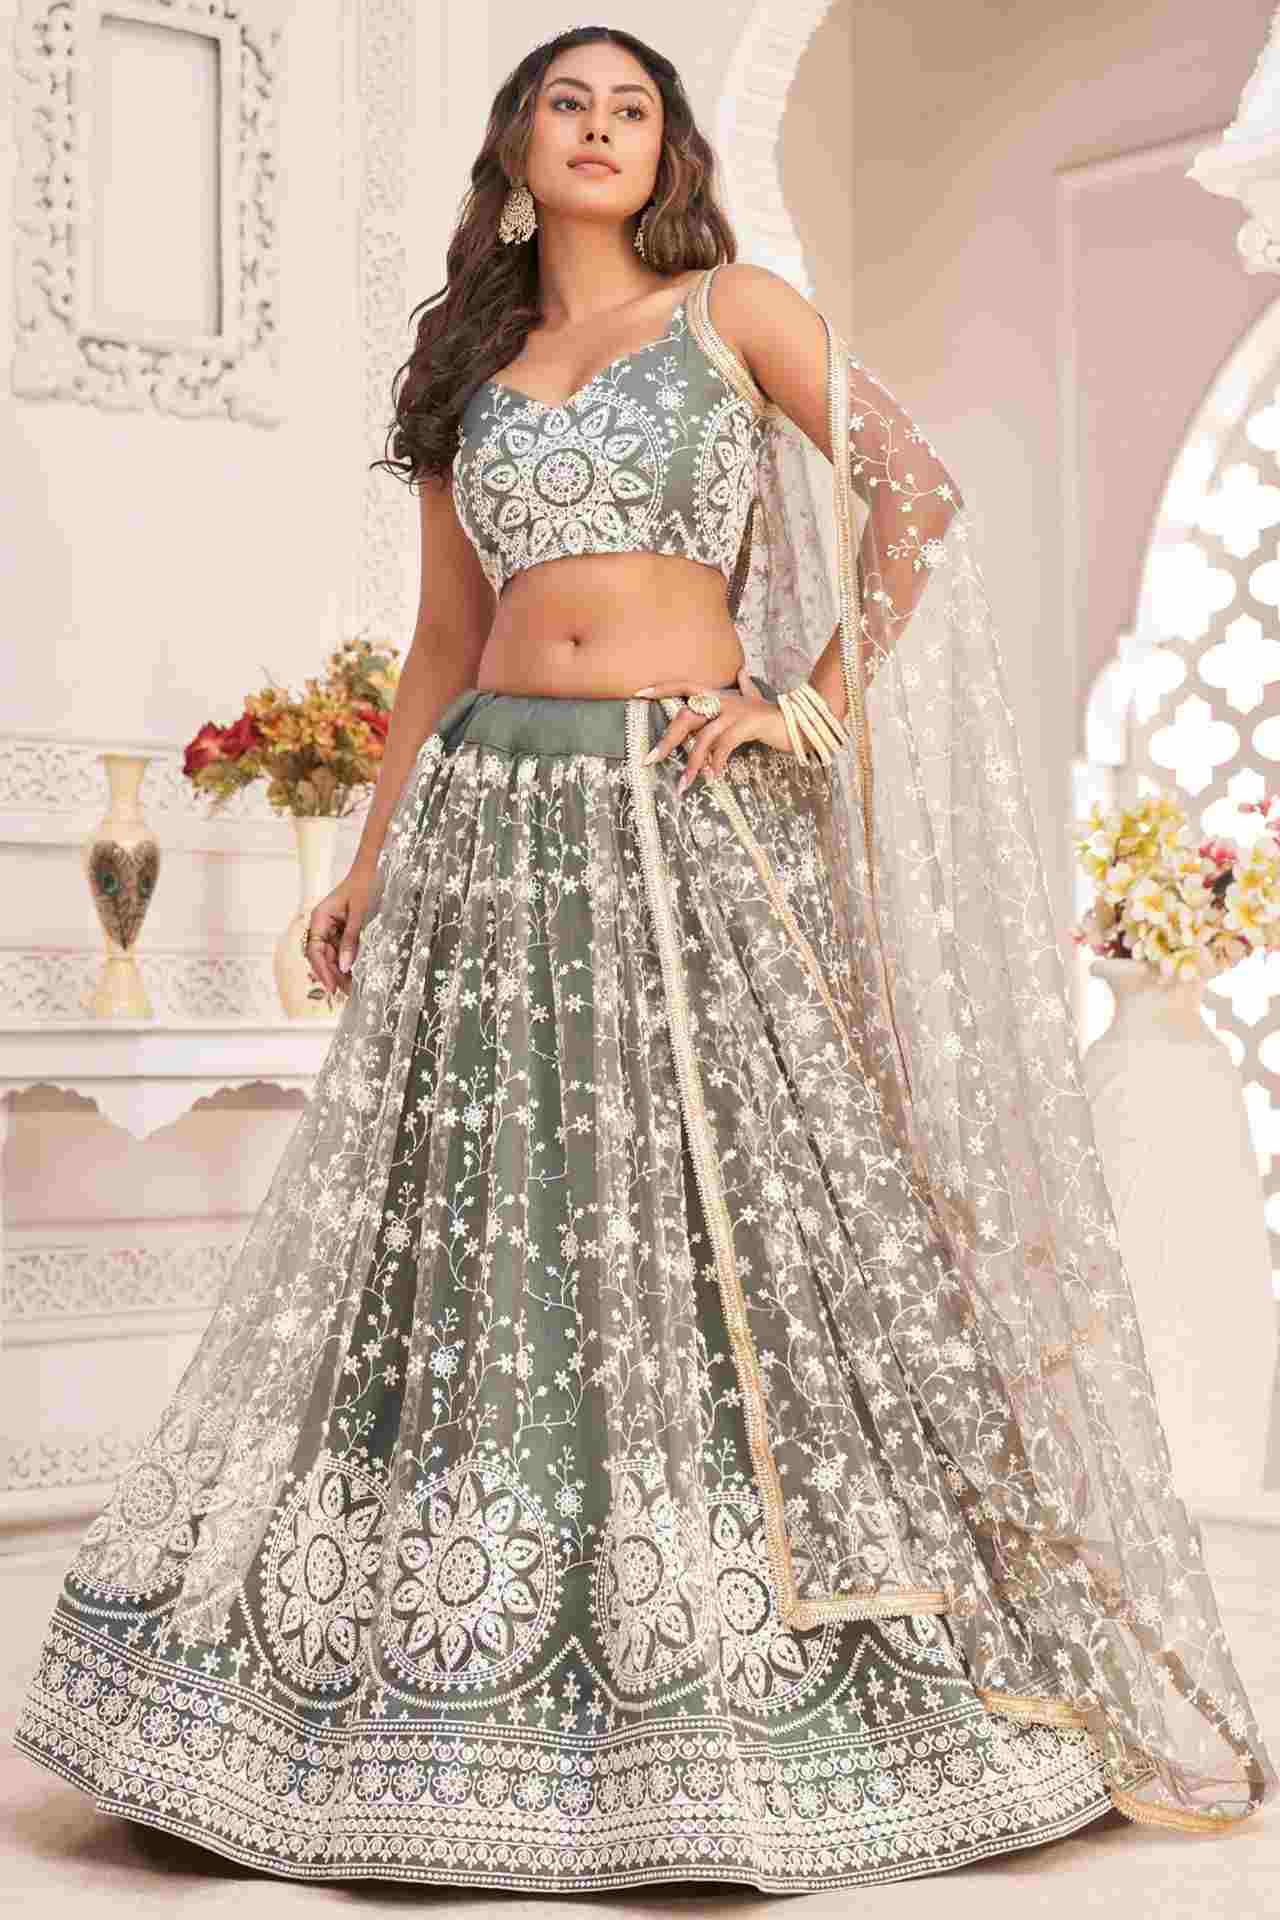 Party Wear Lehenga Designs for a Modern Look